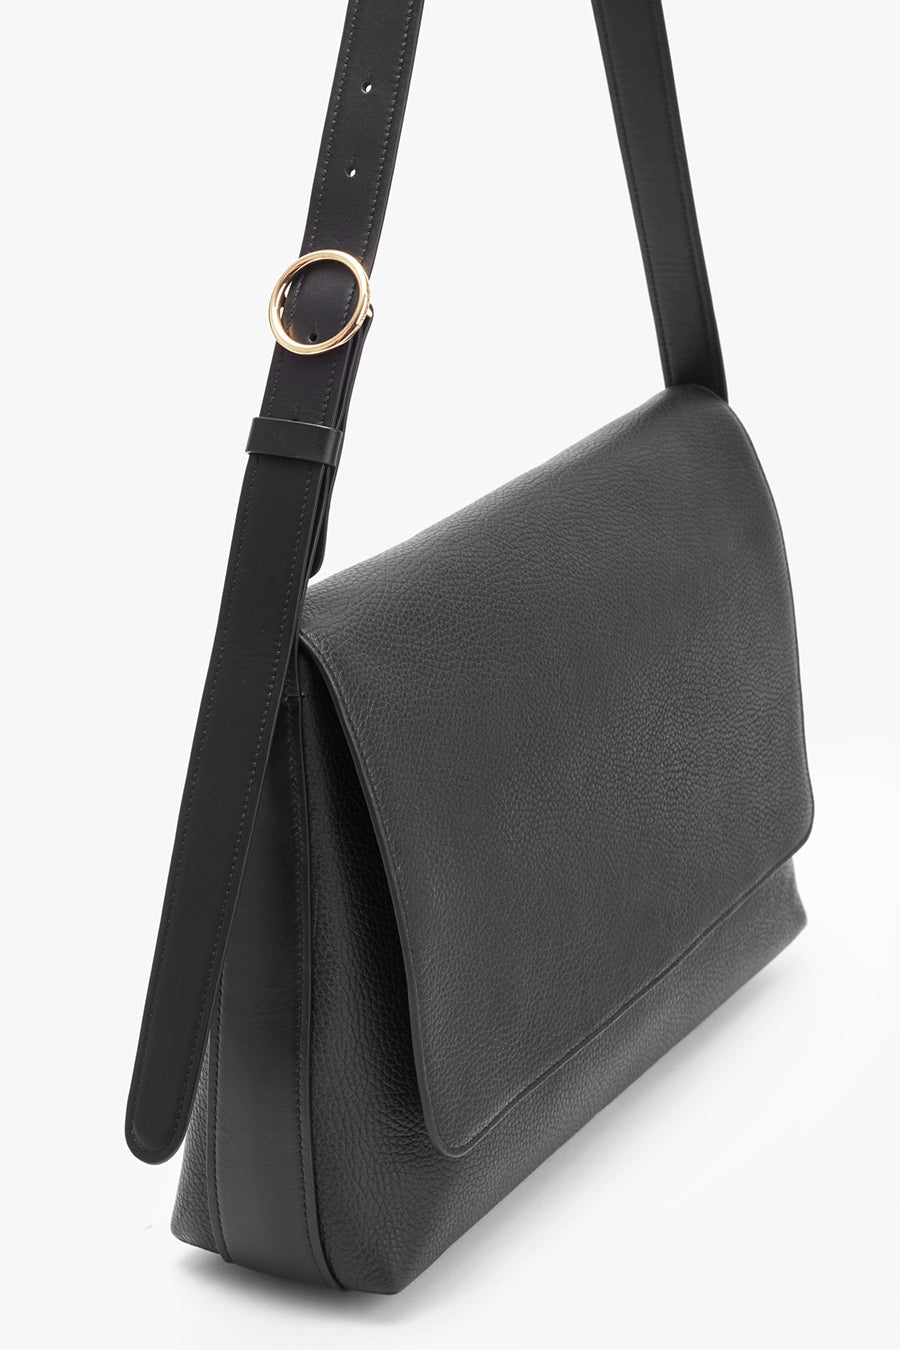 Shoulder bag with an adjustable strap and metal ring.